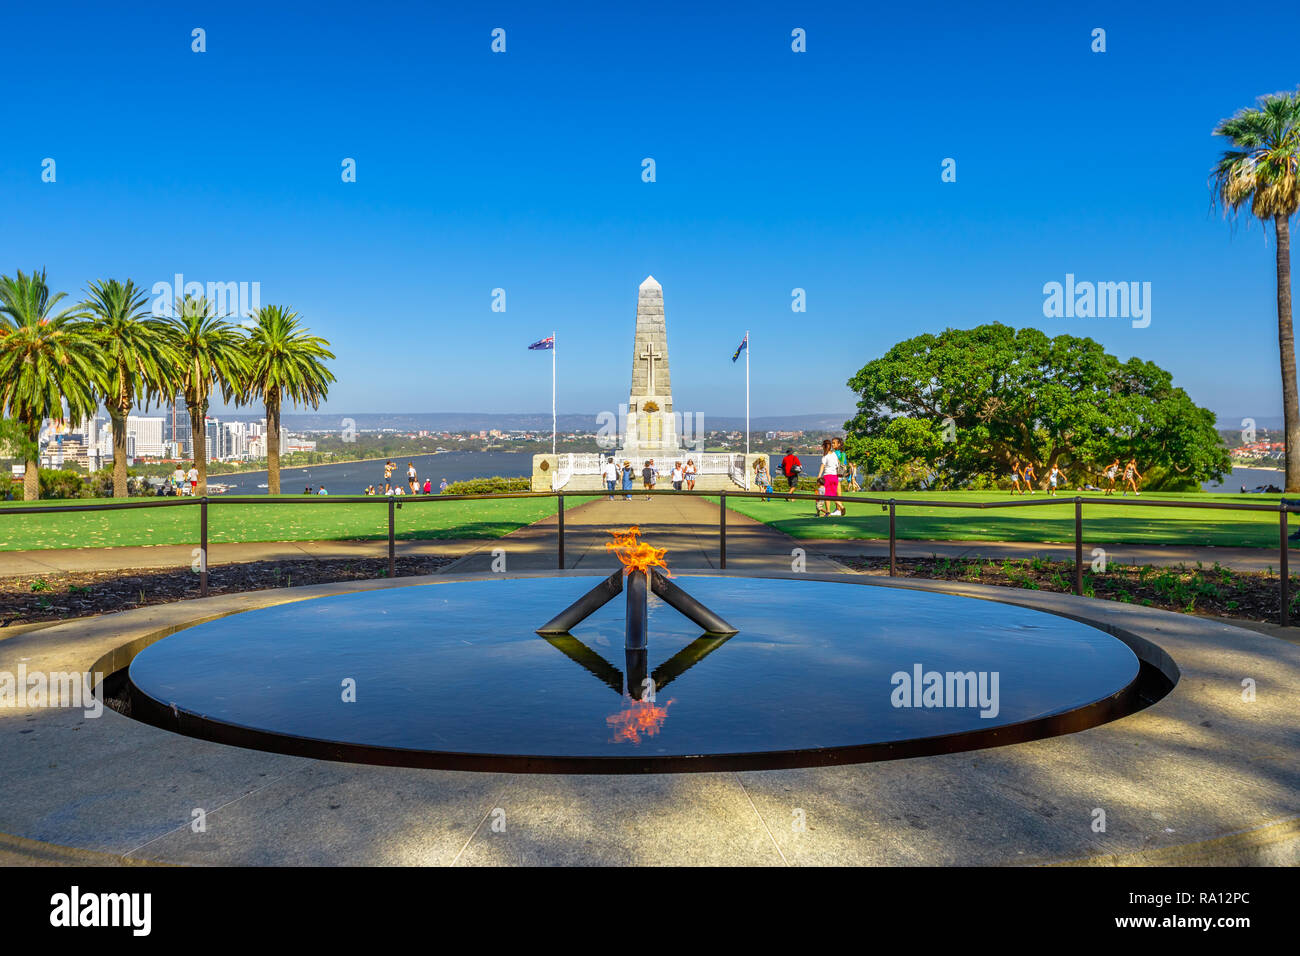 Perth, Australia - Jan 3, 2018: Eternal flame of Remembrance and Pool of Reflection with the State War Memorial behind on Mount Eliza in Kings Park. Perth cityscape on background. Copy space, blue sky Stock Photo